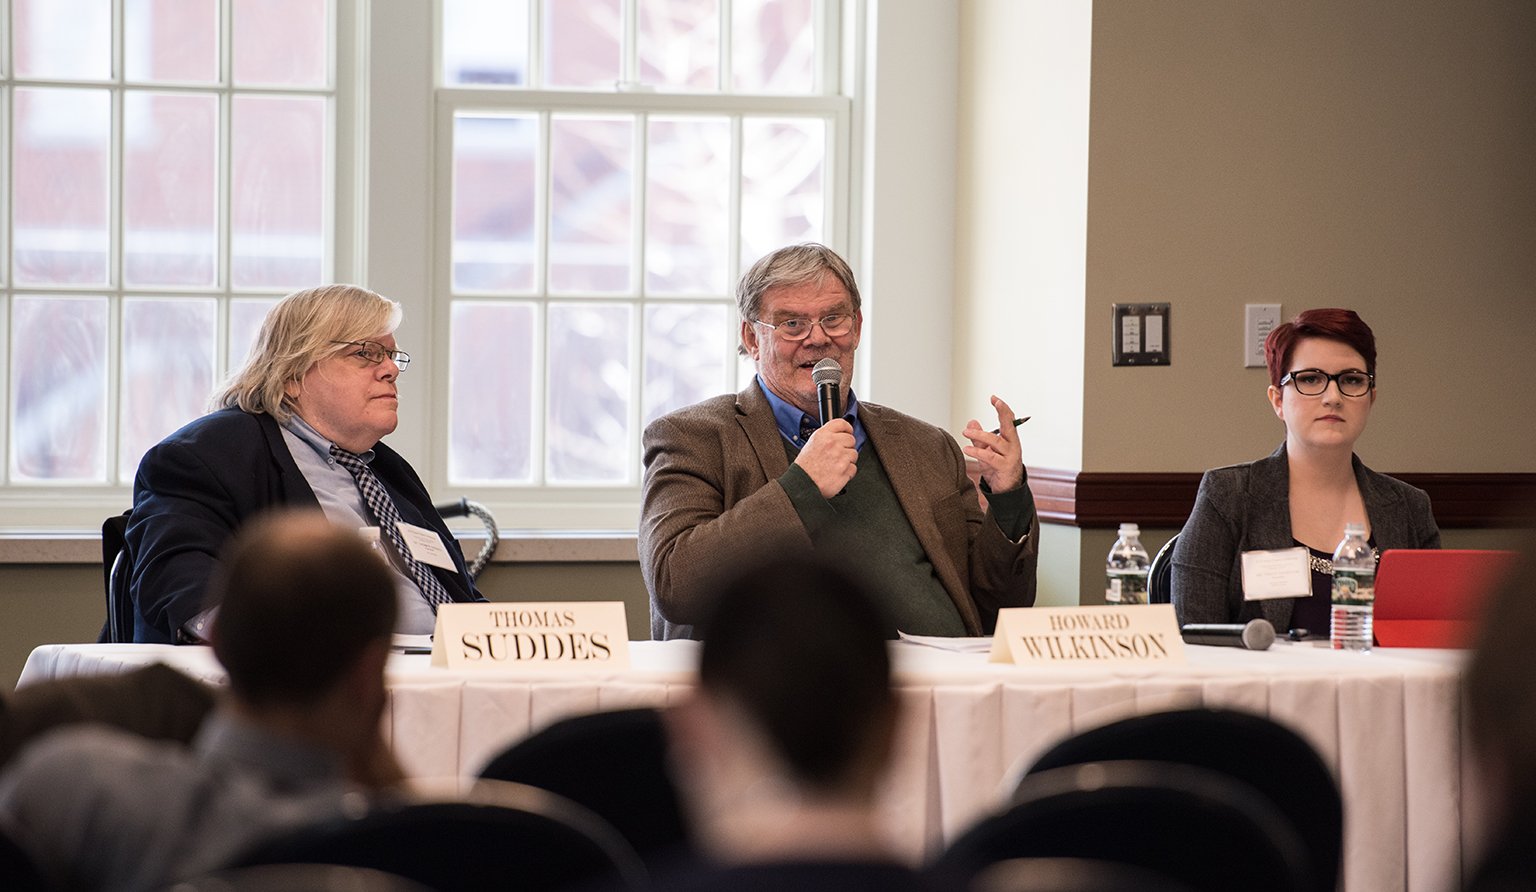 Thomas Suddes, MA '02, CERT, PHD '09; Howard Wilkinson; and Trista Thurston, BSJ '16, serve as panelists for the conference's topic, "The Regional News Media During the Presidential Election of 2016."